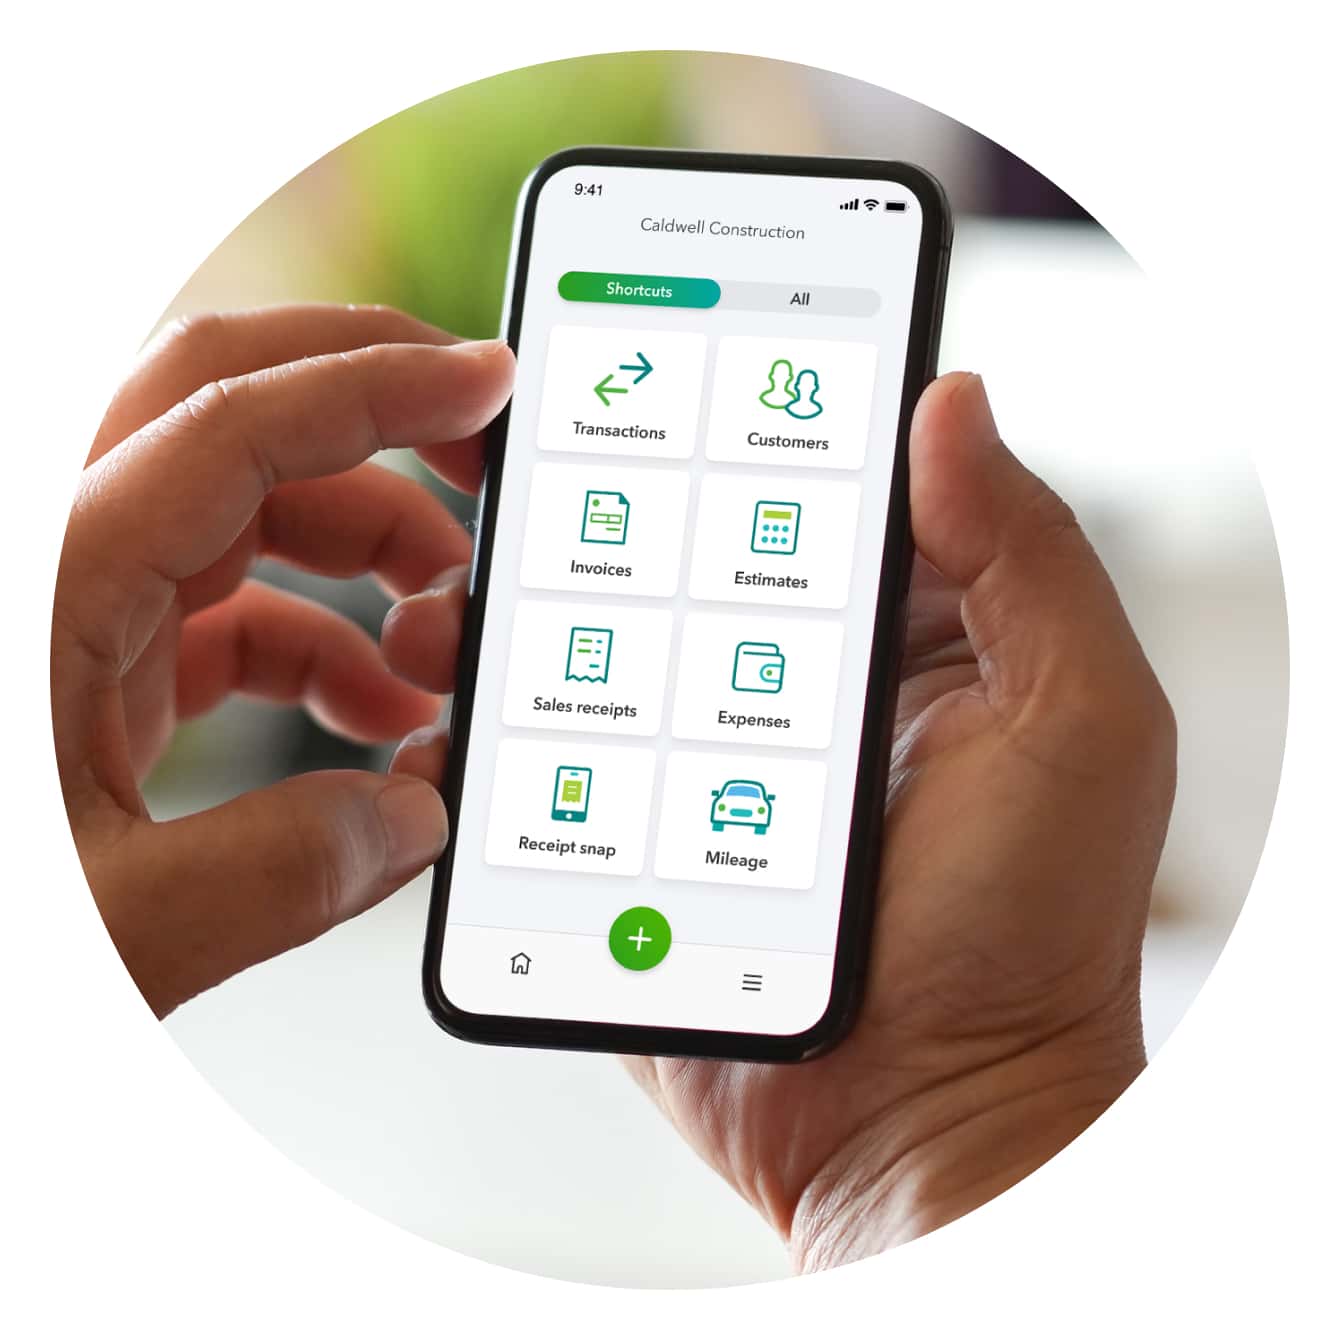 A hand holding a smartphone showing QuickBooks Online shortcuts – transactions, customers, invoices, estimates and more.